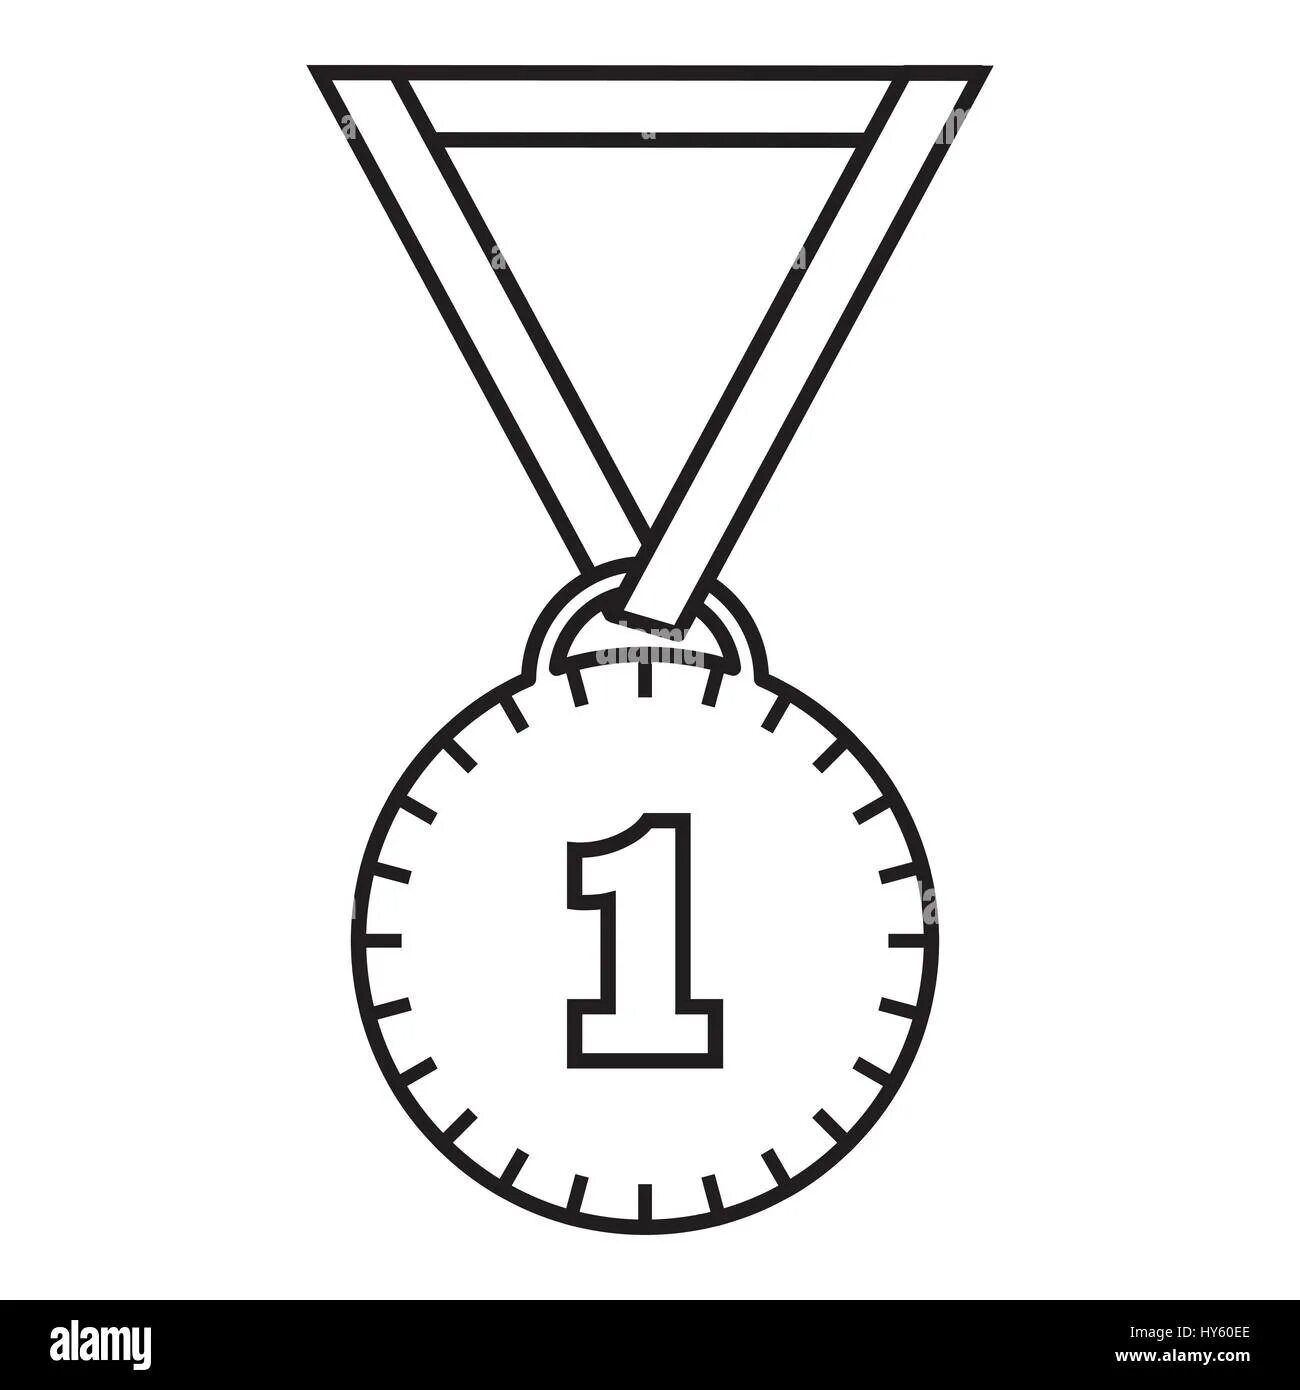 Colorfully embroidered 1st place medal coloring page